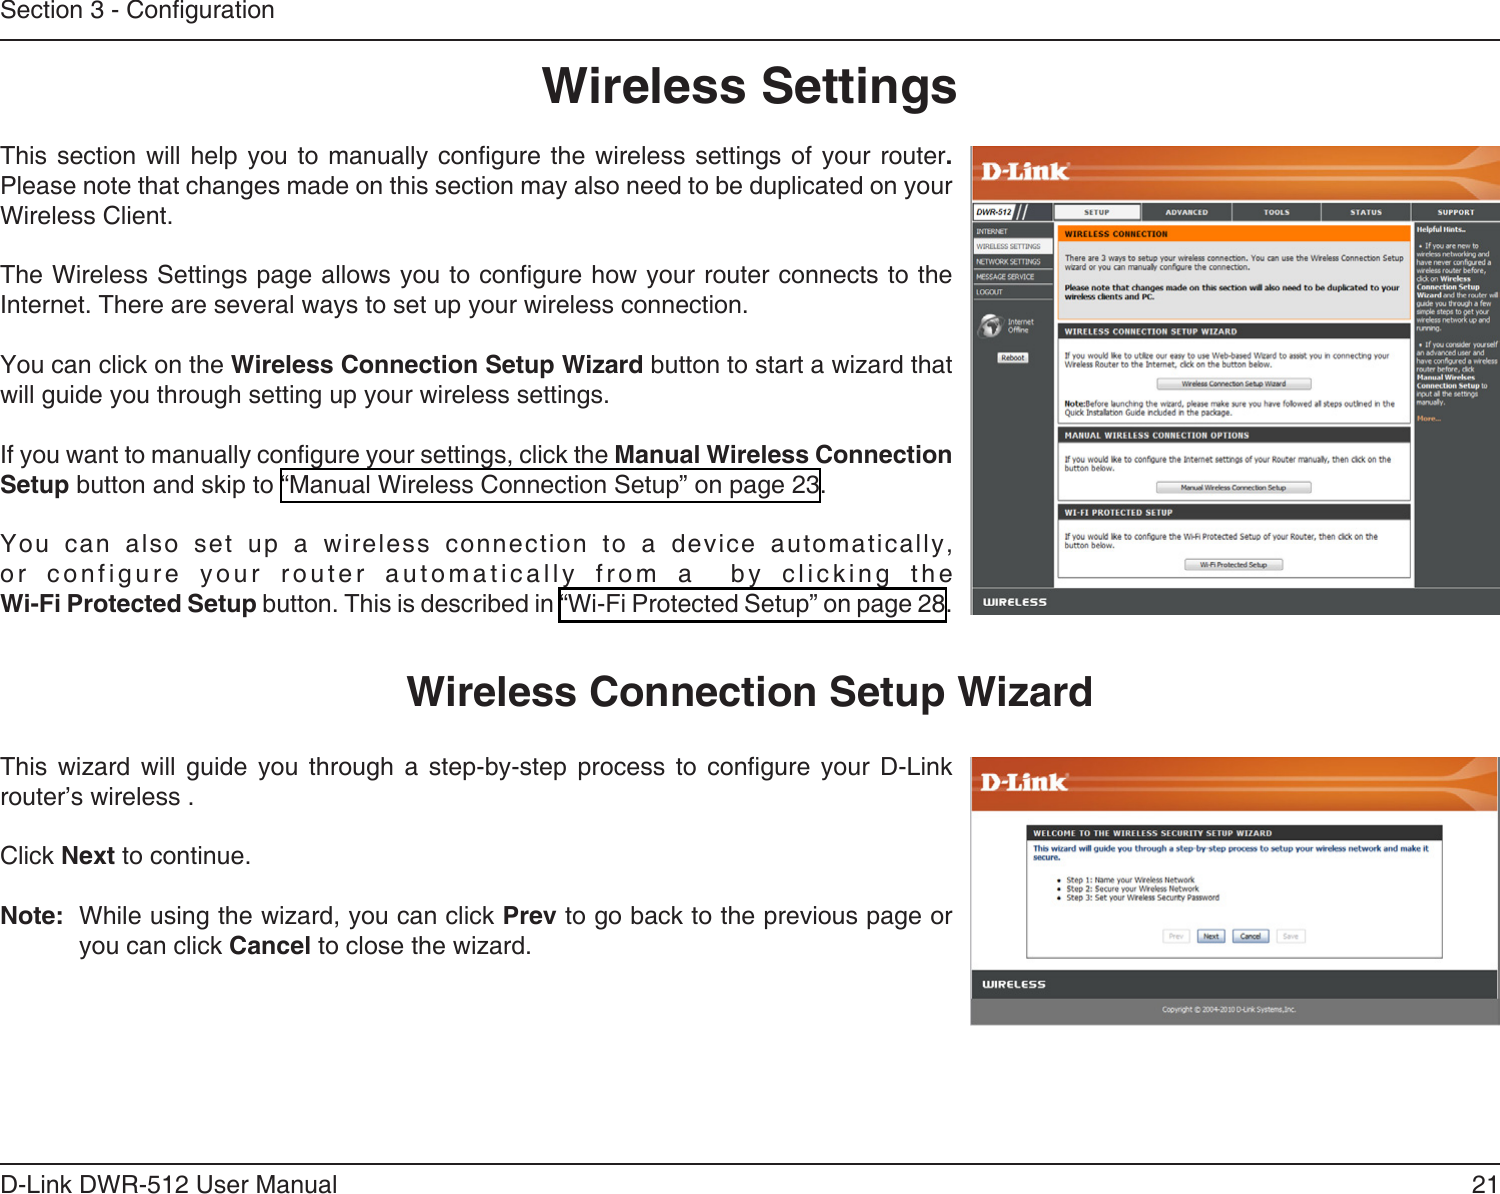 21D-Link DWR-512 User ManualSection 3 - CongurationWireless SettingsThis section  will  help you to  manually congure the  wireless settings of  your  router. Please note that changes made on this section may also need to be duplicated on your Wireless Client.The Wireless Settings page allows you to congure how your router connects to the Internet. There are several ways to set up your wireless connection. You can click on the Wireless Connection Setup Wizard button to start a wizard that will guide you through setting up your wireless settings.If you want to manually congure your settings, click the Manual Wireless Connection Setup button and skip to “Manual Wireless Connection Setup” on page 23.You  can  also  set  up  a  wireless  connection  to  a  device  automatically, or  configure  your  router  automatically  from  a    by  clicking  the  Wi-Fi Protected Setup button. This is described in “Wi-Fi Protected Setup” on page 28.This  wizard  will  guide  you  through  a  step-by-step  process  to  congure  your  D-Link router’s wireless .Click Next to continue.Note:  While using the wizard, you can click Prev to go back to the previous page or you can click Cancel to close the wizard.Wireless Connection Setup Wizard